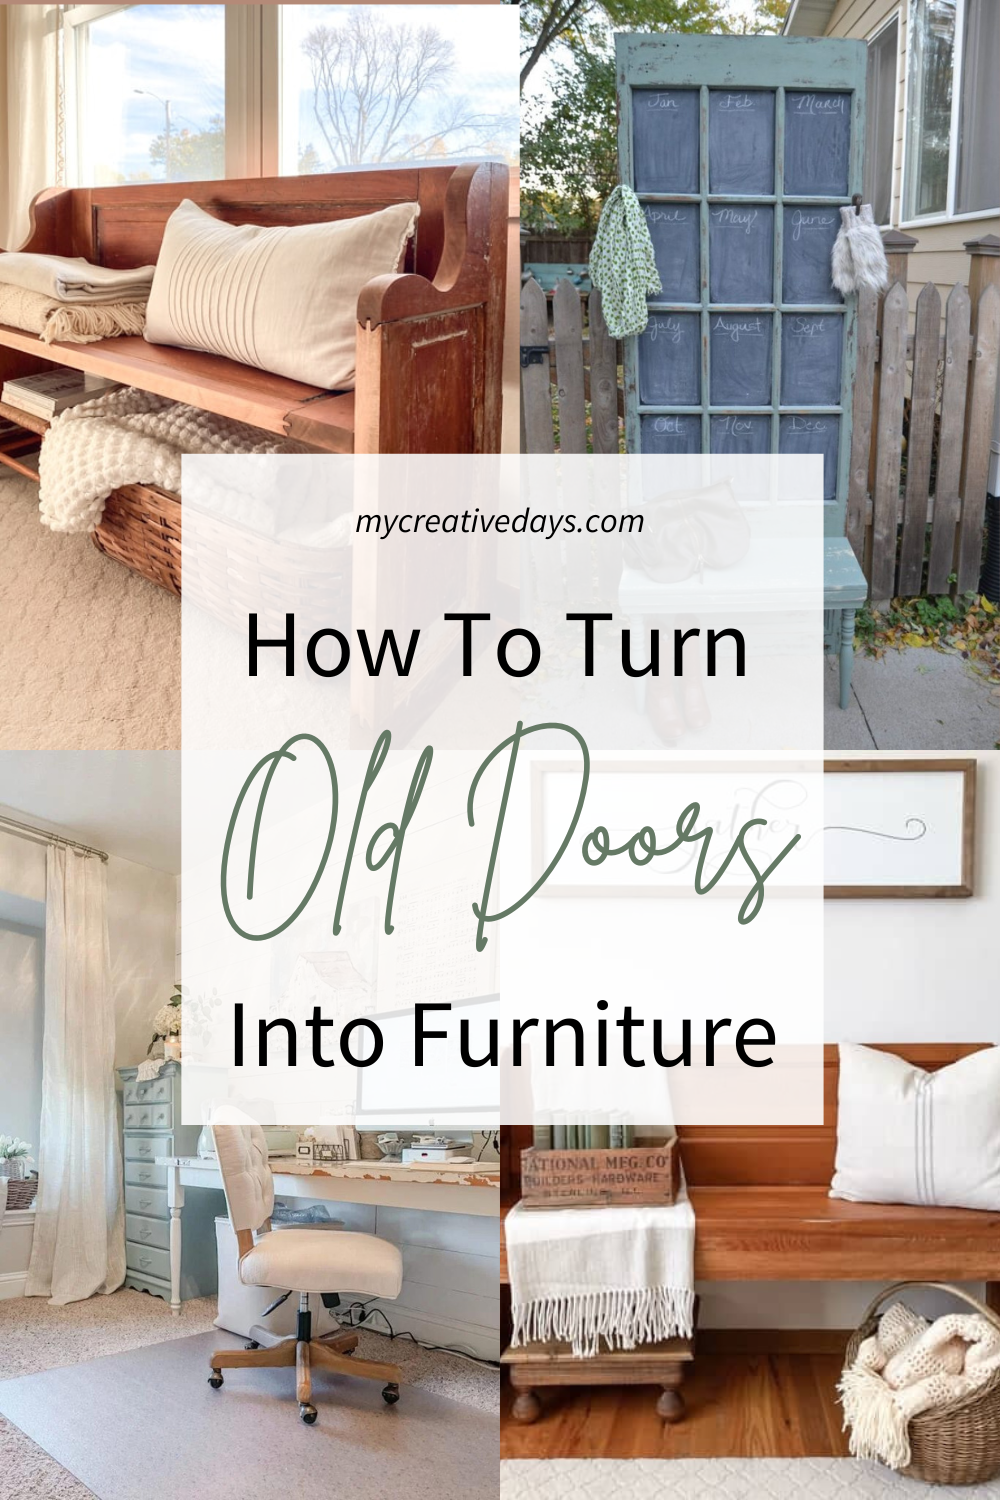 How To Turn Old Doors Into Furniture